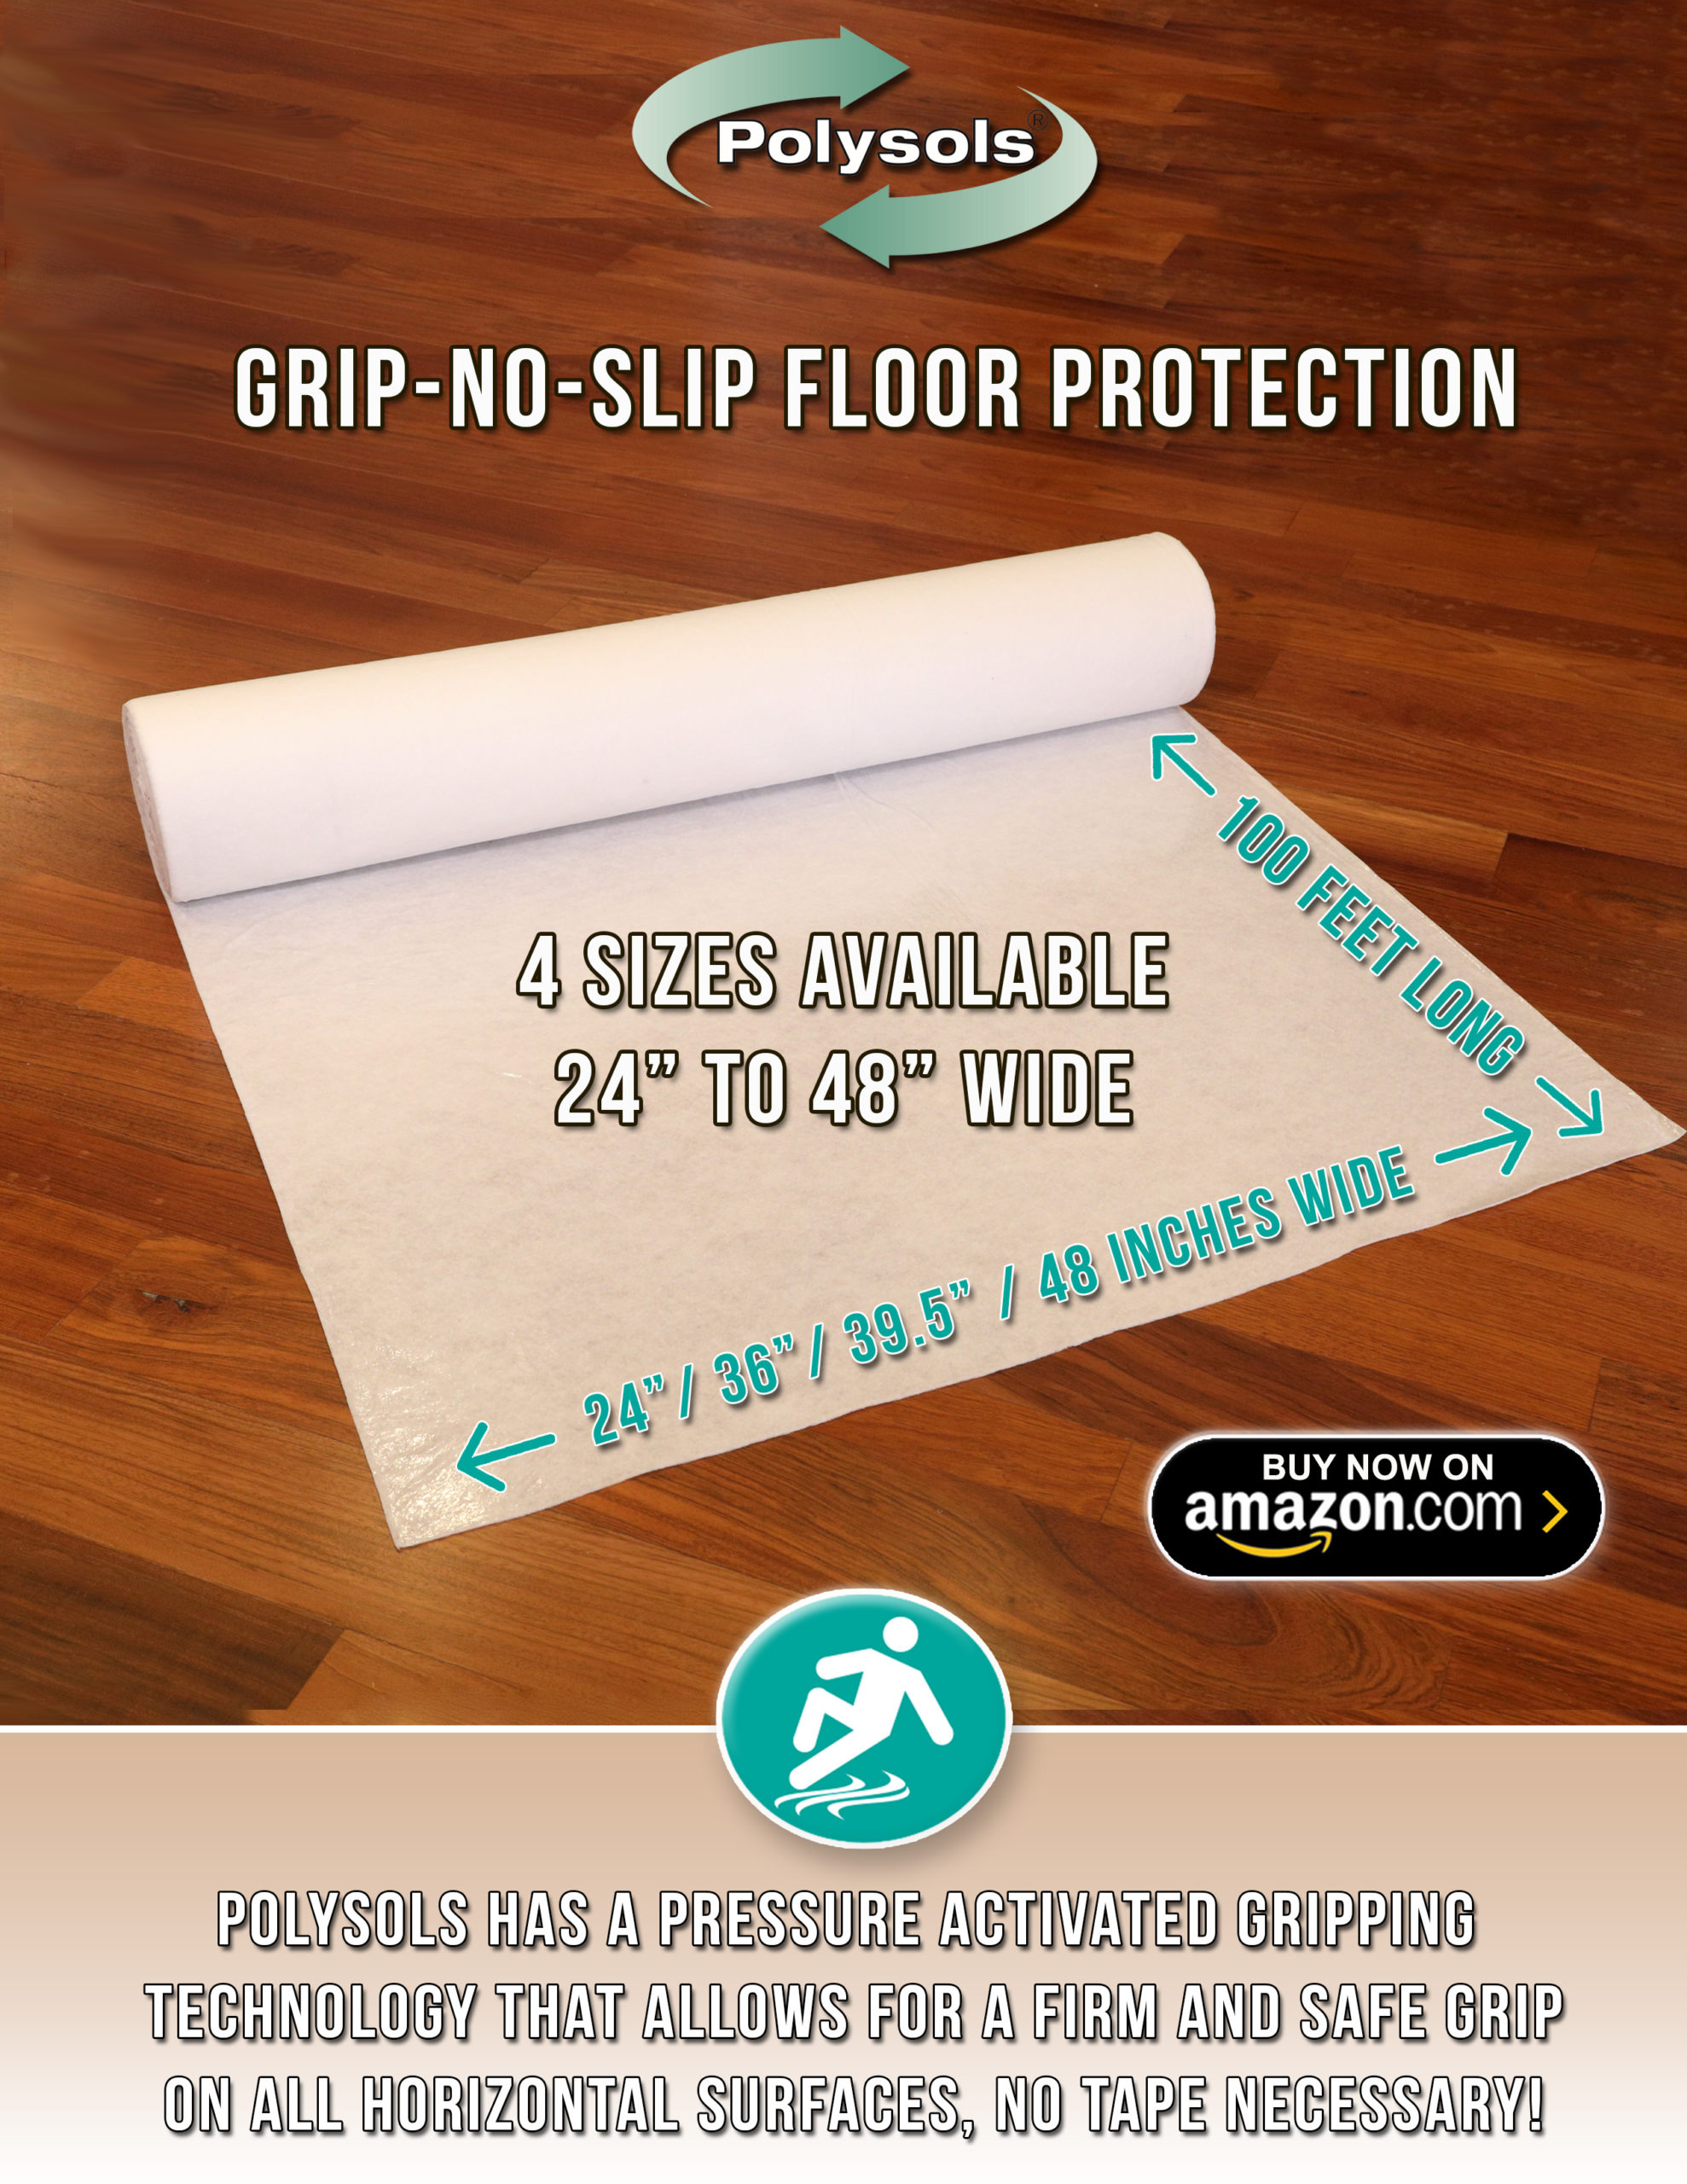 Polysols Heavy Duty Floor Film- Self Adhesive- Floor Protection for Hardwood Floors and Tile. Made in USA. Polysols Floor Film and plastic sheeting heavy duty for construction and DIY projects.